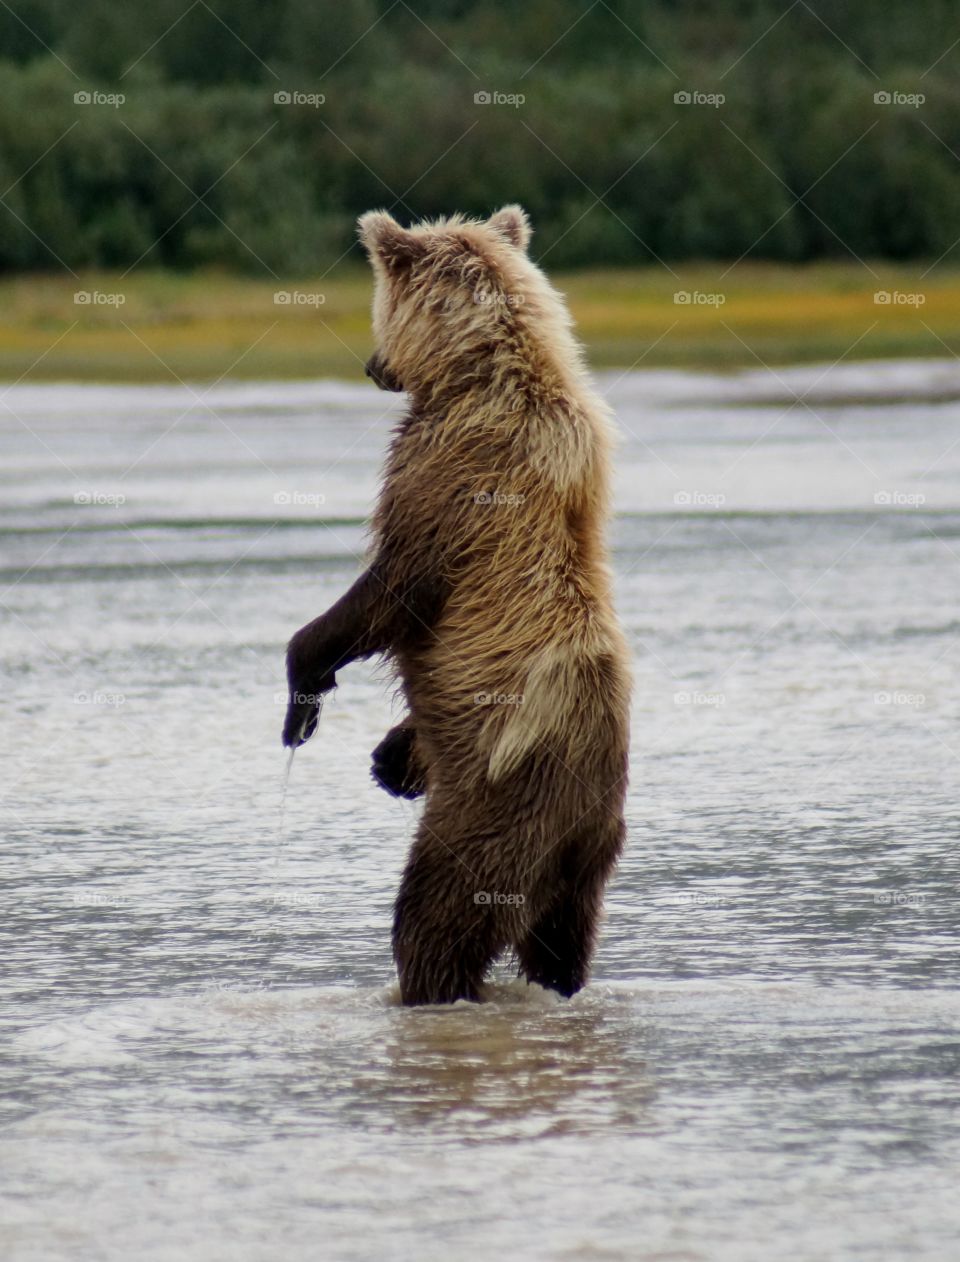 Looking for salmon at Lake Clark